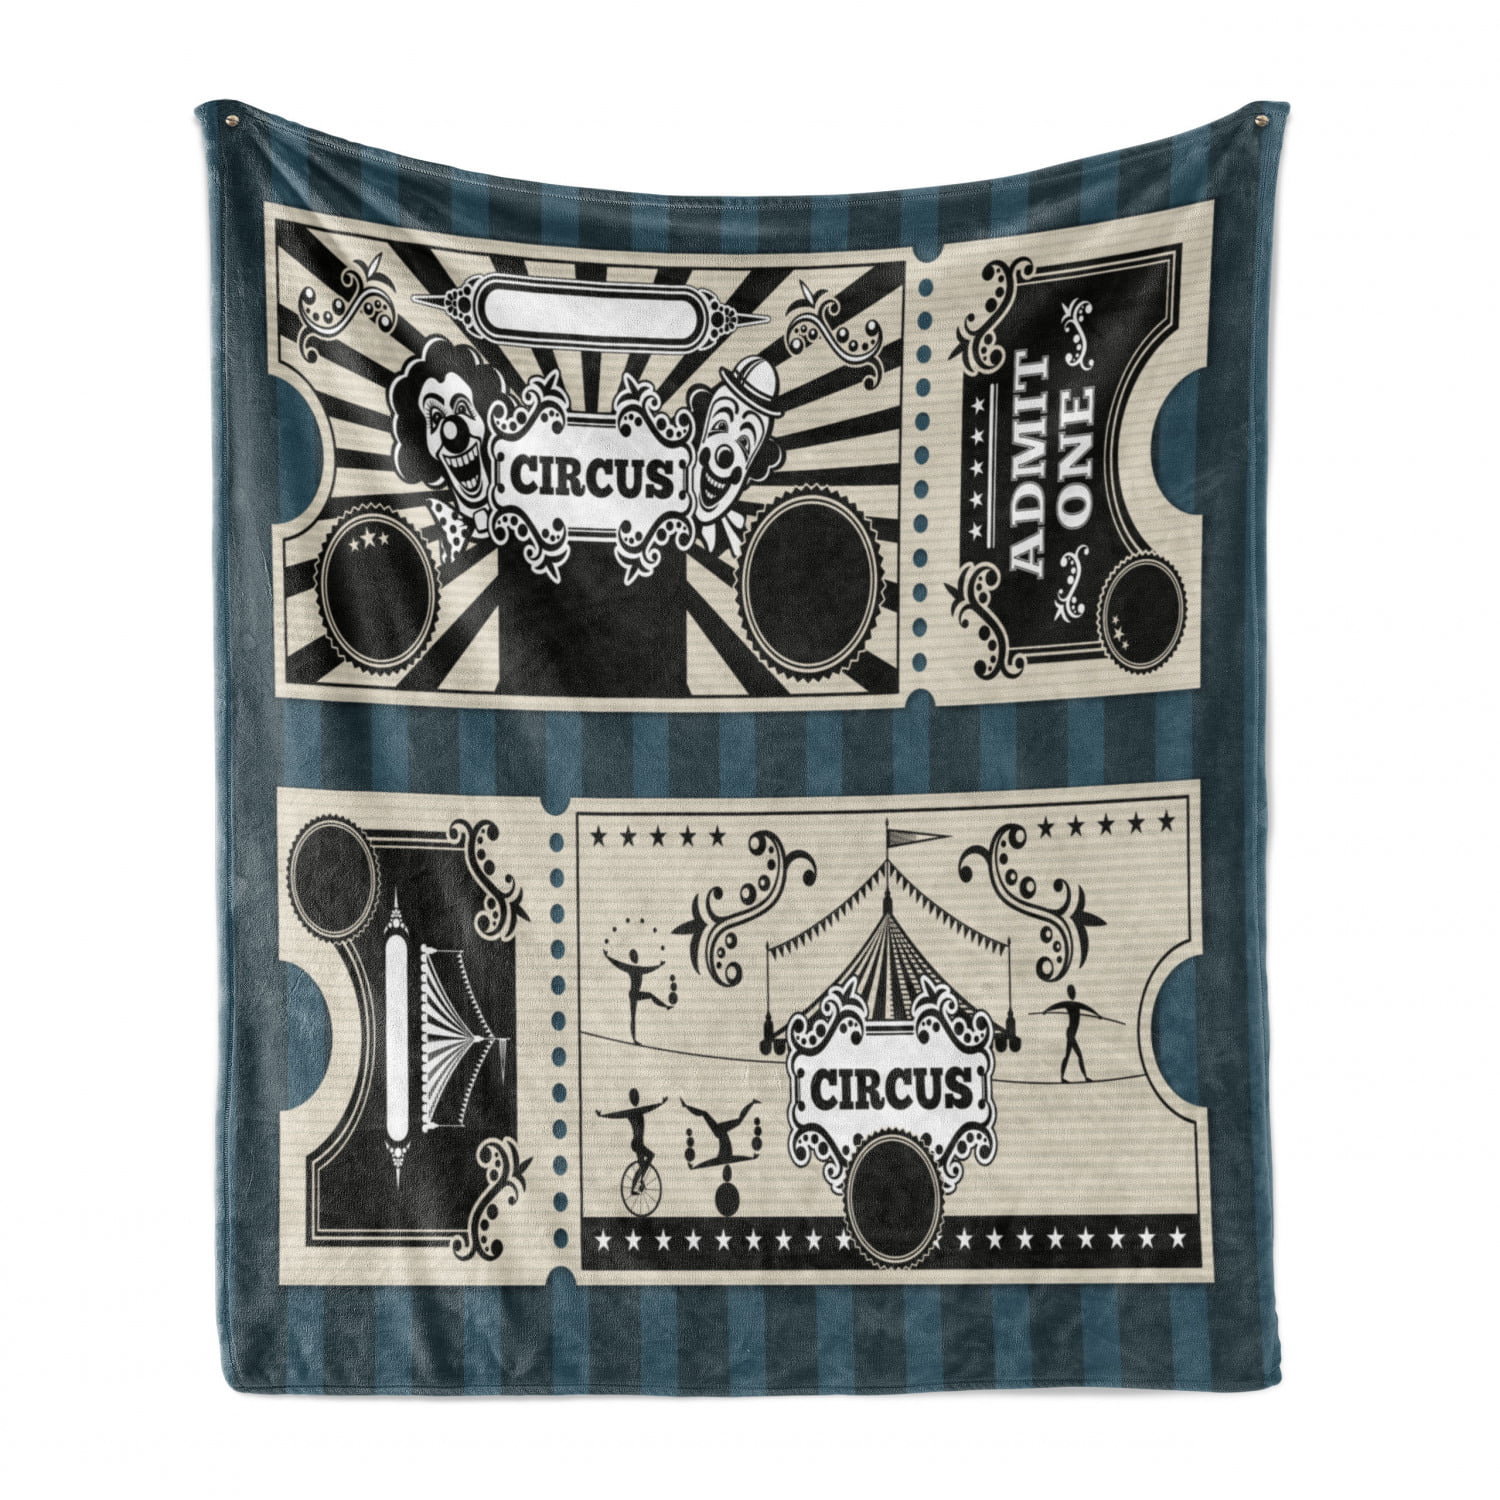 Whimsical Circus Theatre Ticket Admit one Movie Flannel Fleece Bed Blanket Throw Blanket Lightweight Cozy Plush Blanket Home Decor for Bedroom Living Rooms Sofa Couch